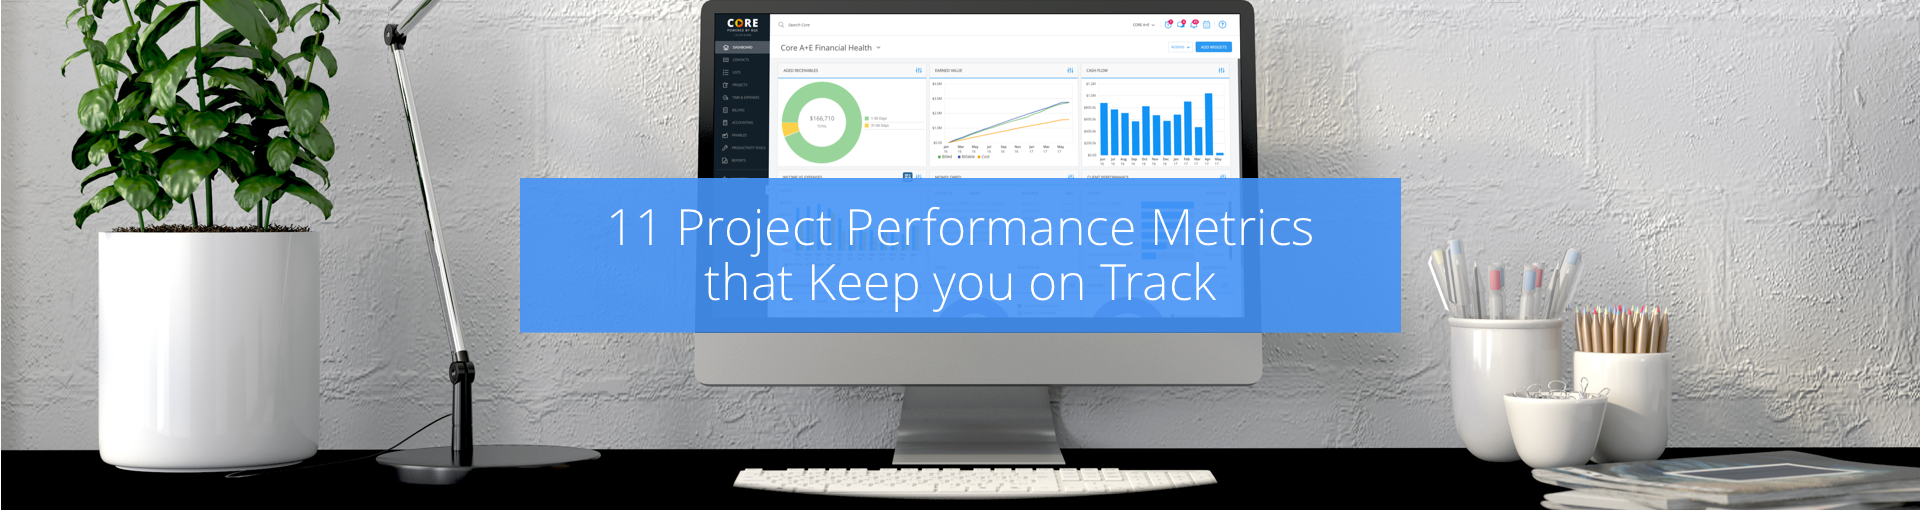 11 Project Performance Metrics that Keep You on Track Featured Image